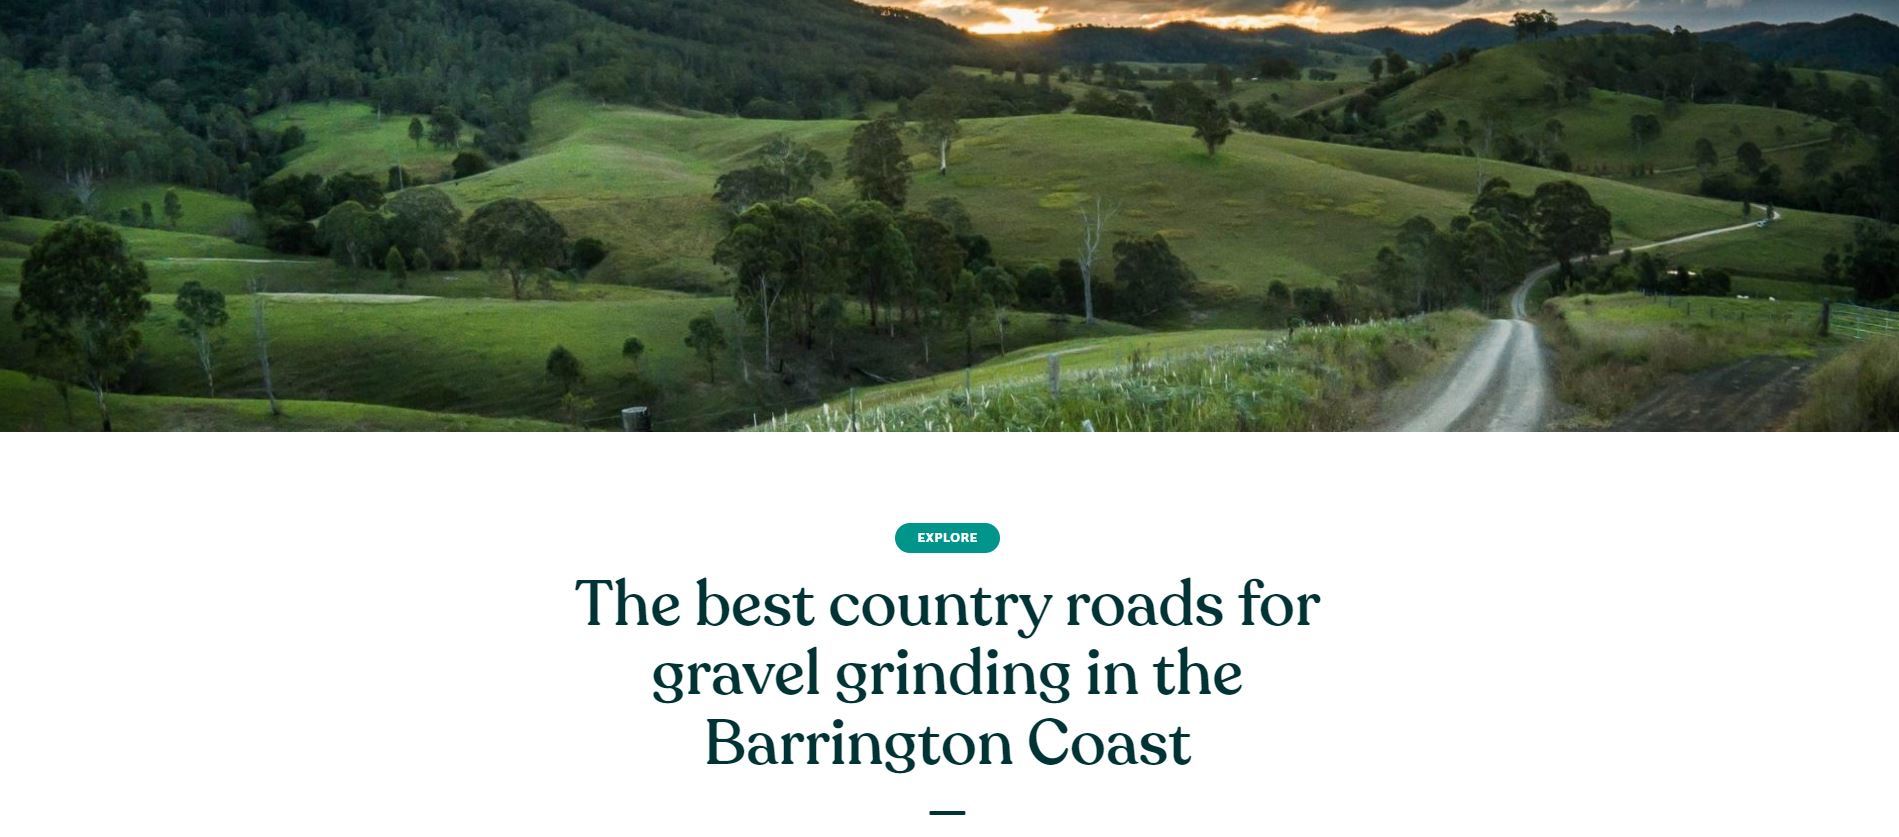 The best country roads for gravel grinding in the Barrington Coast